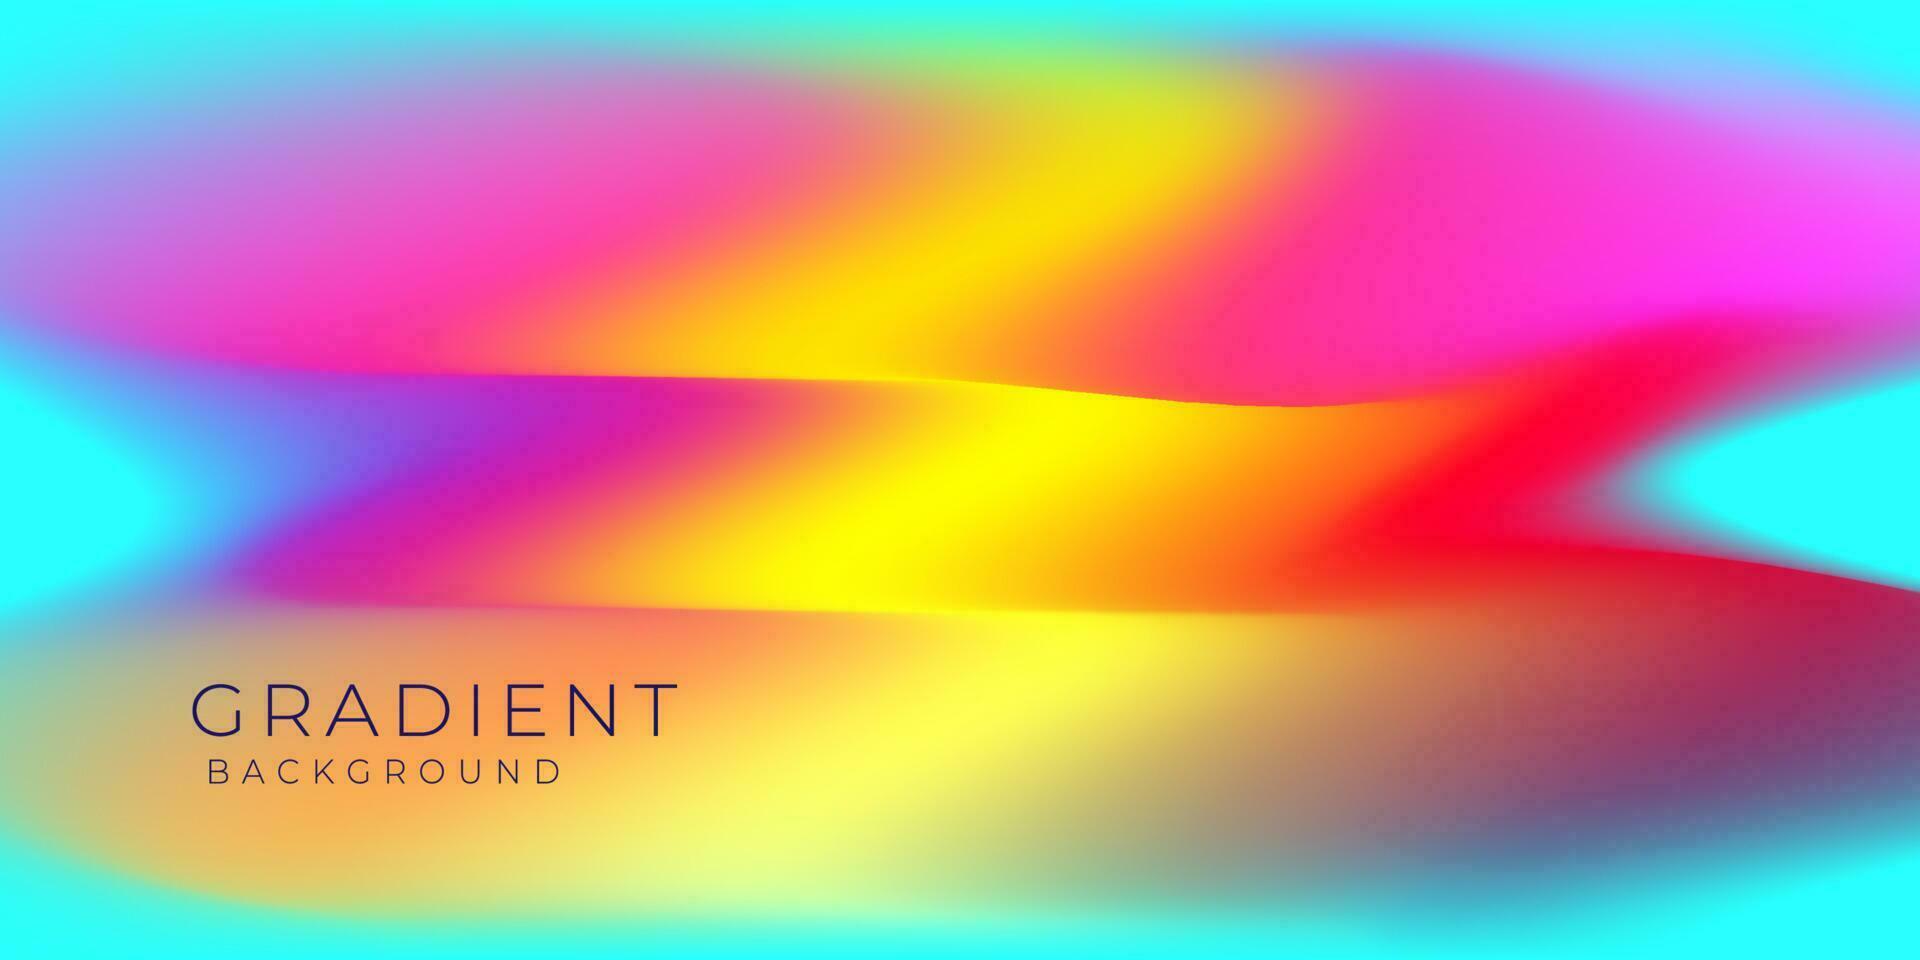 Abstract color gradient, modern blurred background and film grain texture, template with an elegant design concept, minimal style composition, Trendy Gradient grainy texture for your graphic design vector